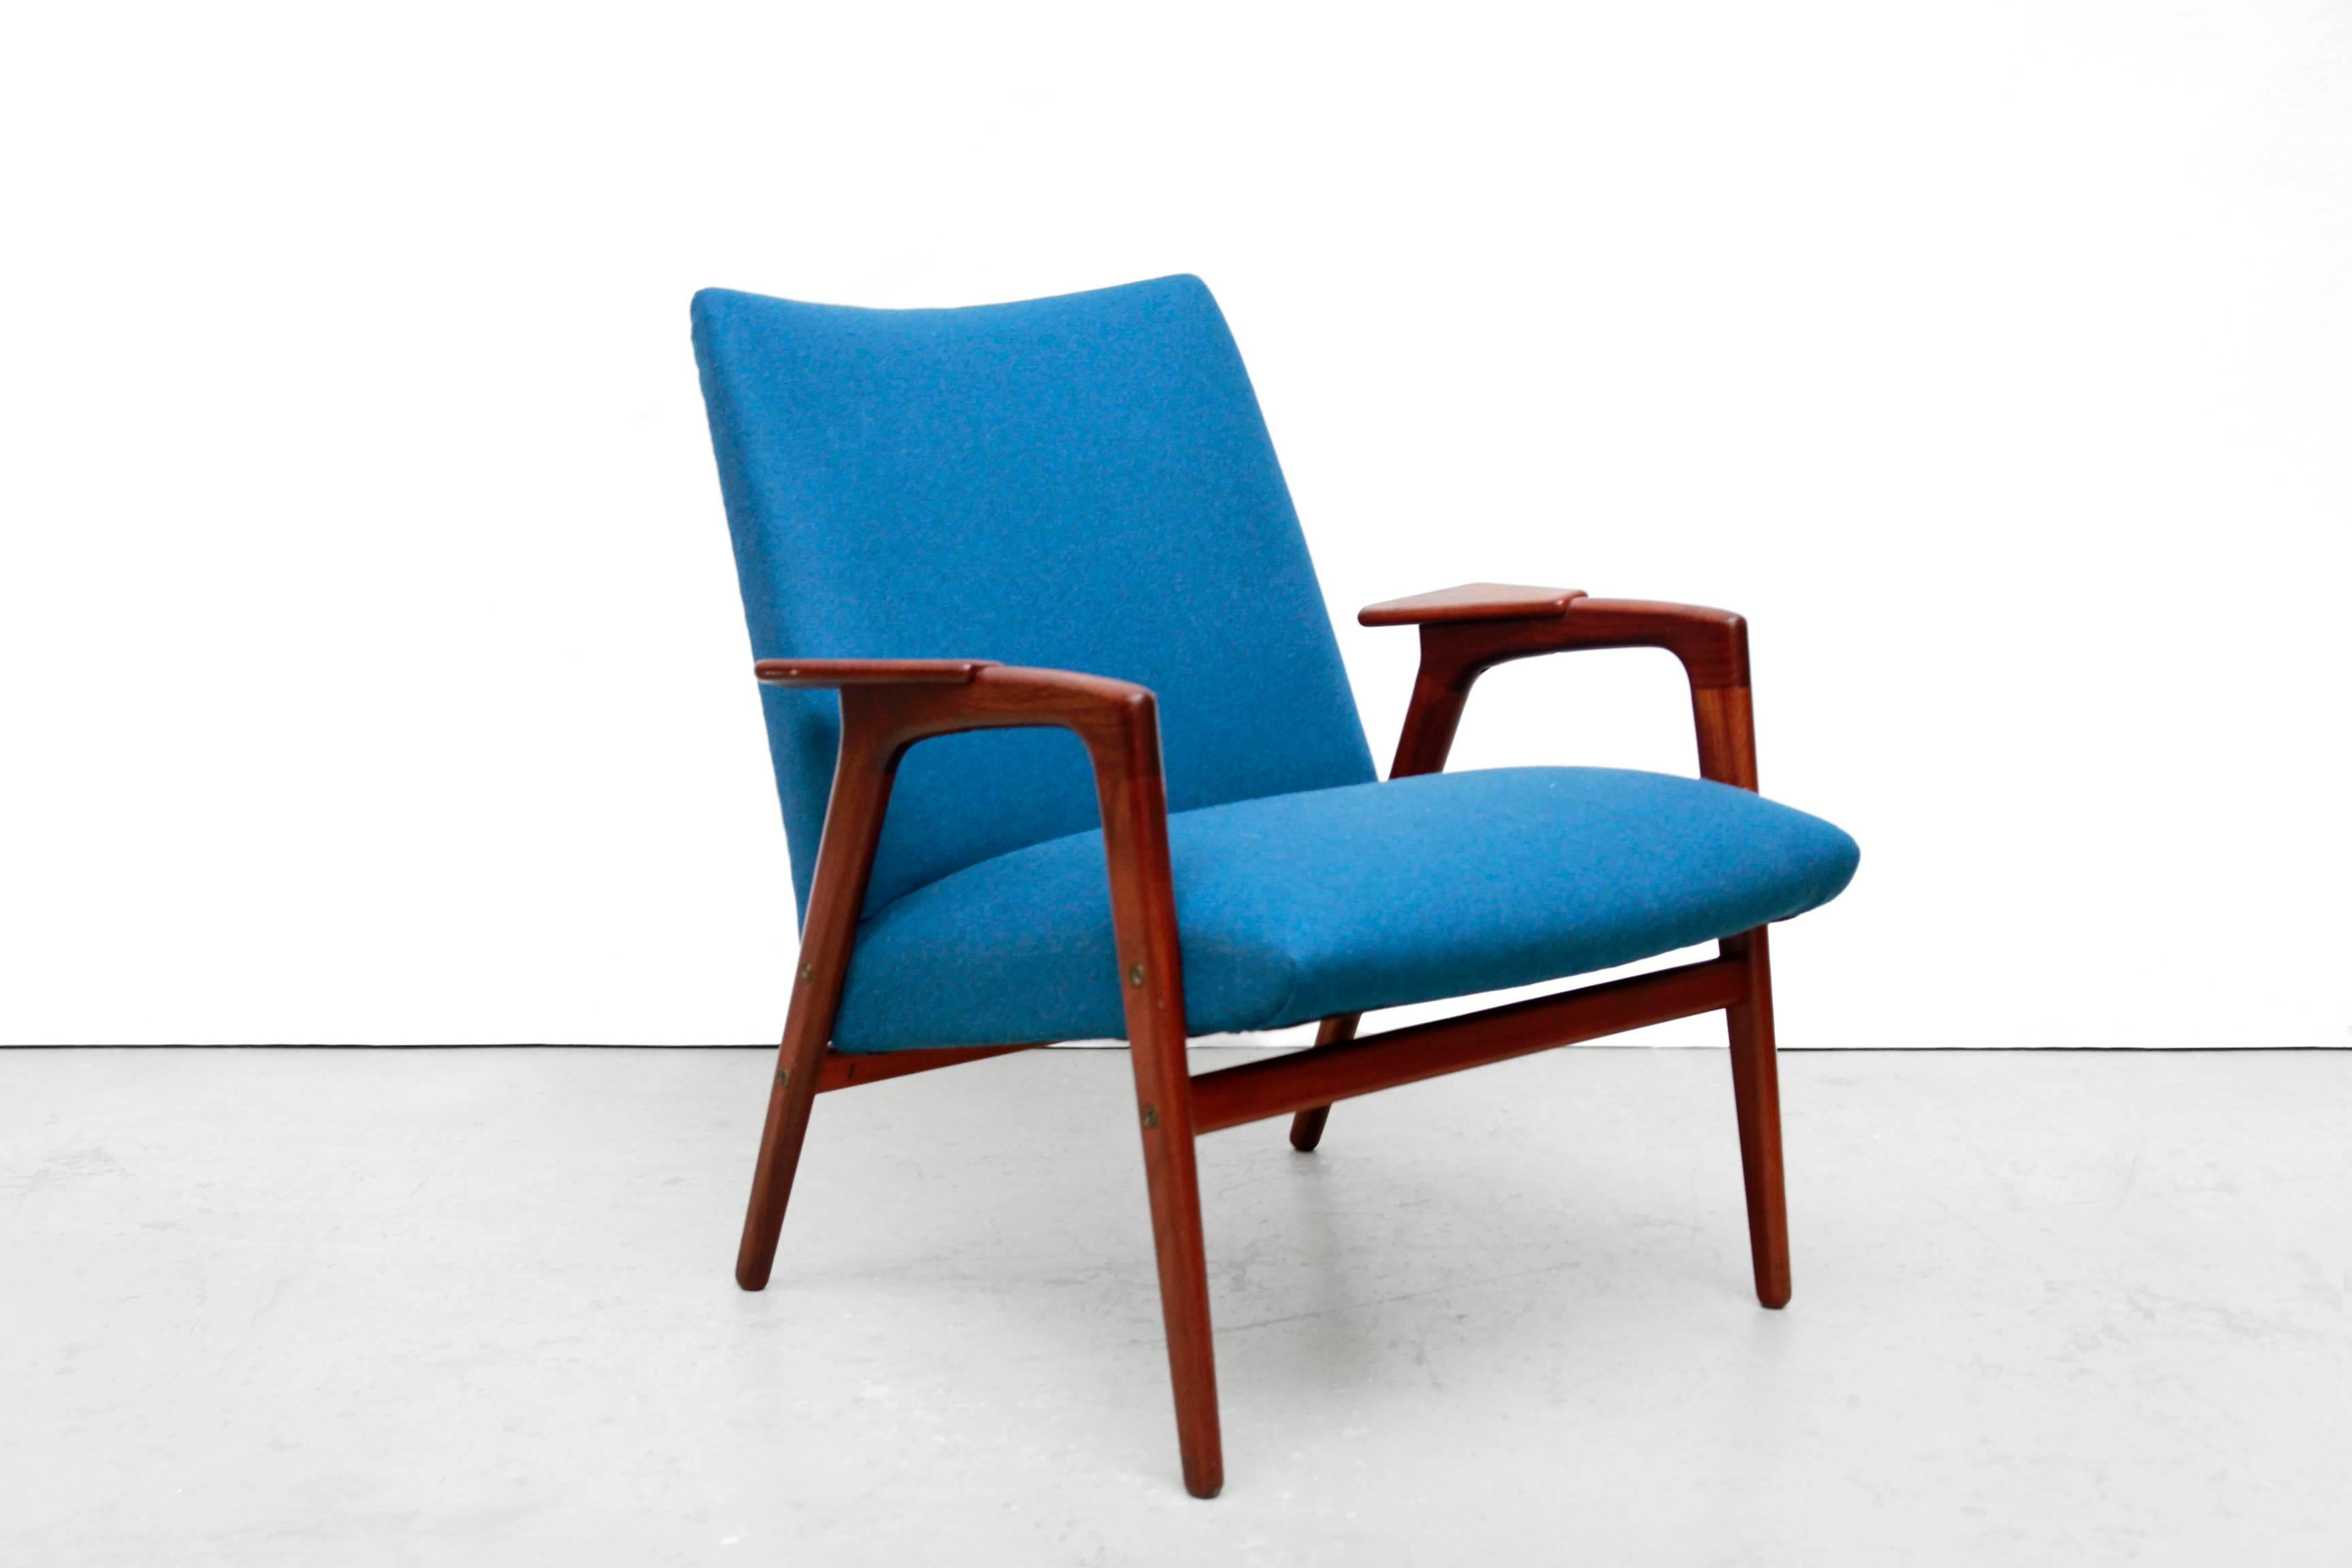 Beautiful and comfortable set of two Ruster armchairs designed by the Swedish designer Yngve Ekstrom for Swedese and sold in the Netherlands by Dutch manufacturer Pastoe.
The set consists of an armchair with high back, and one with a low back, also